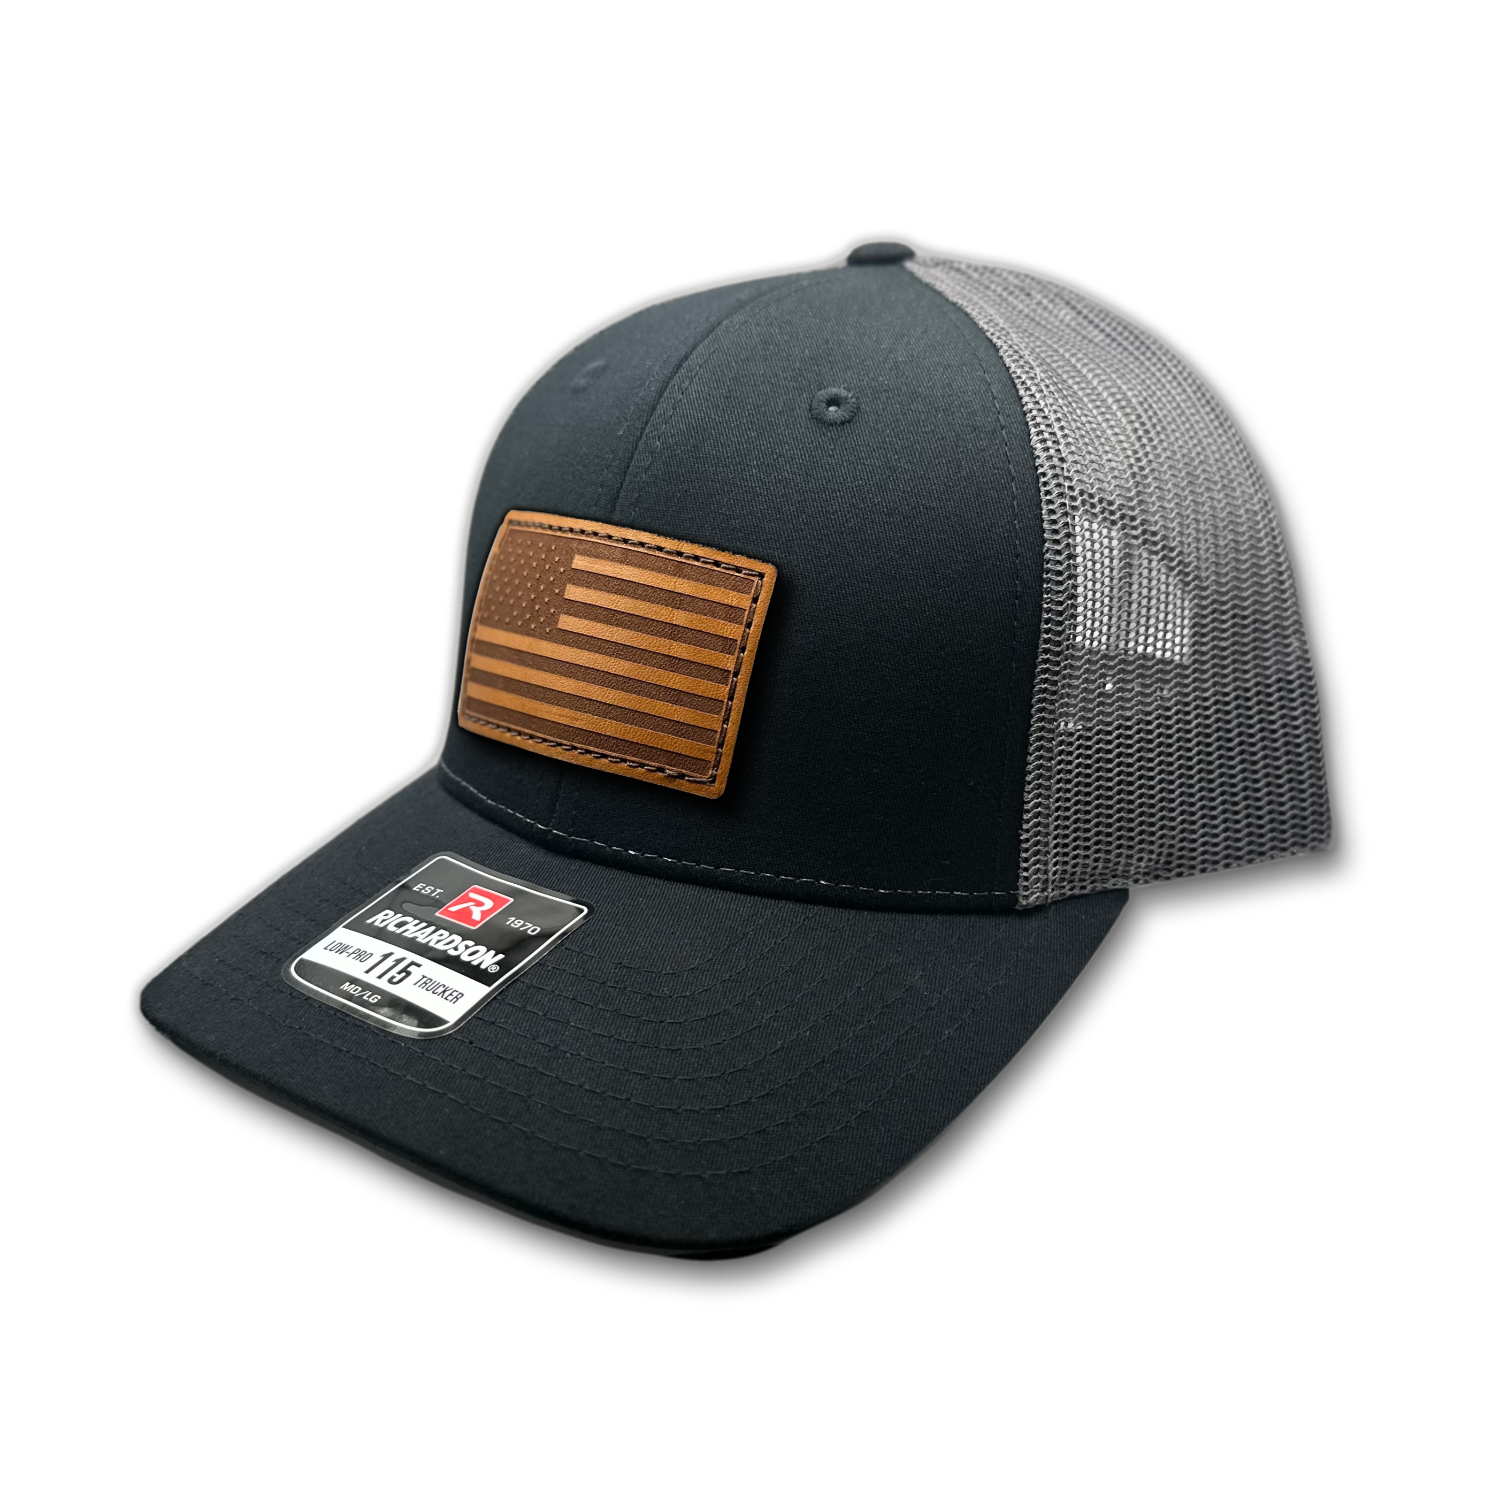 Image of a Black/Charcoal Richardson 115 hat with an American flag patch made of genuine leather, laser engraved and securely sewn onto the hat. The low profile trucker style hat is adjustable to fit small or M/L sizes, offering a versatile and fashionable accessory for any occasion.